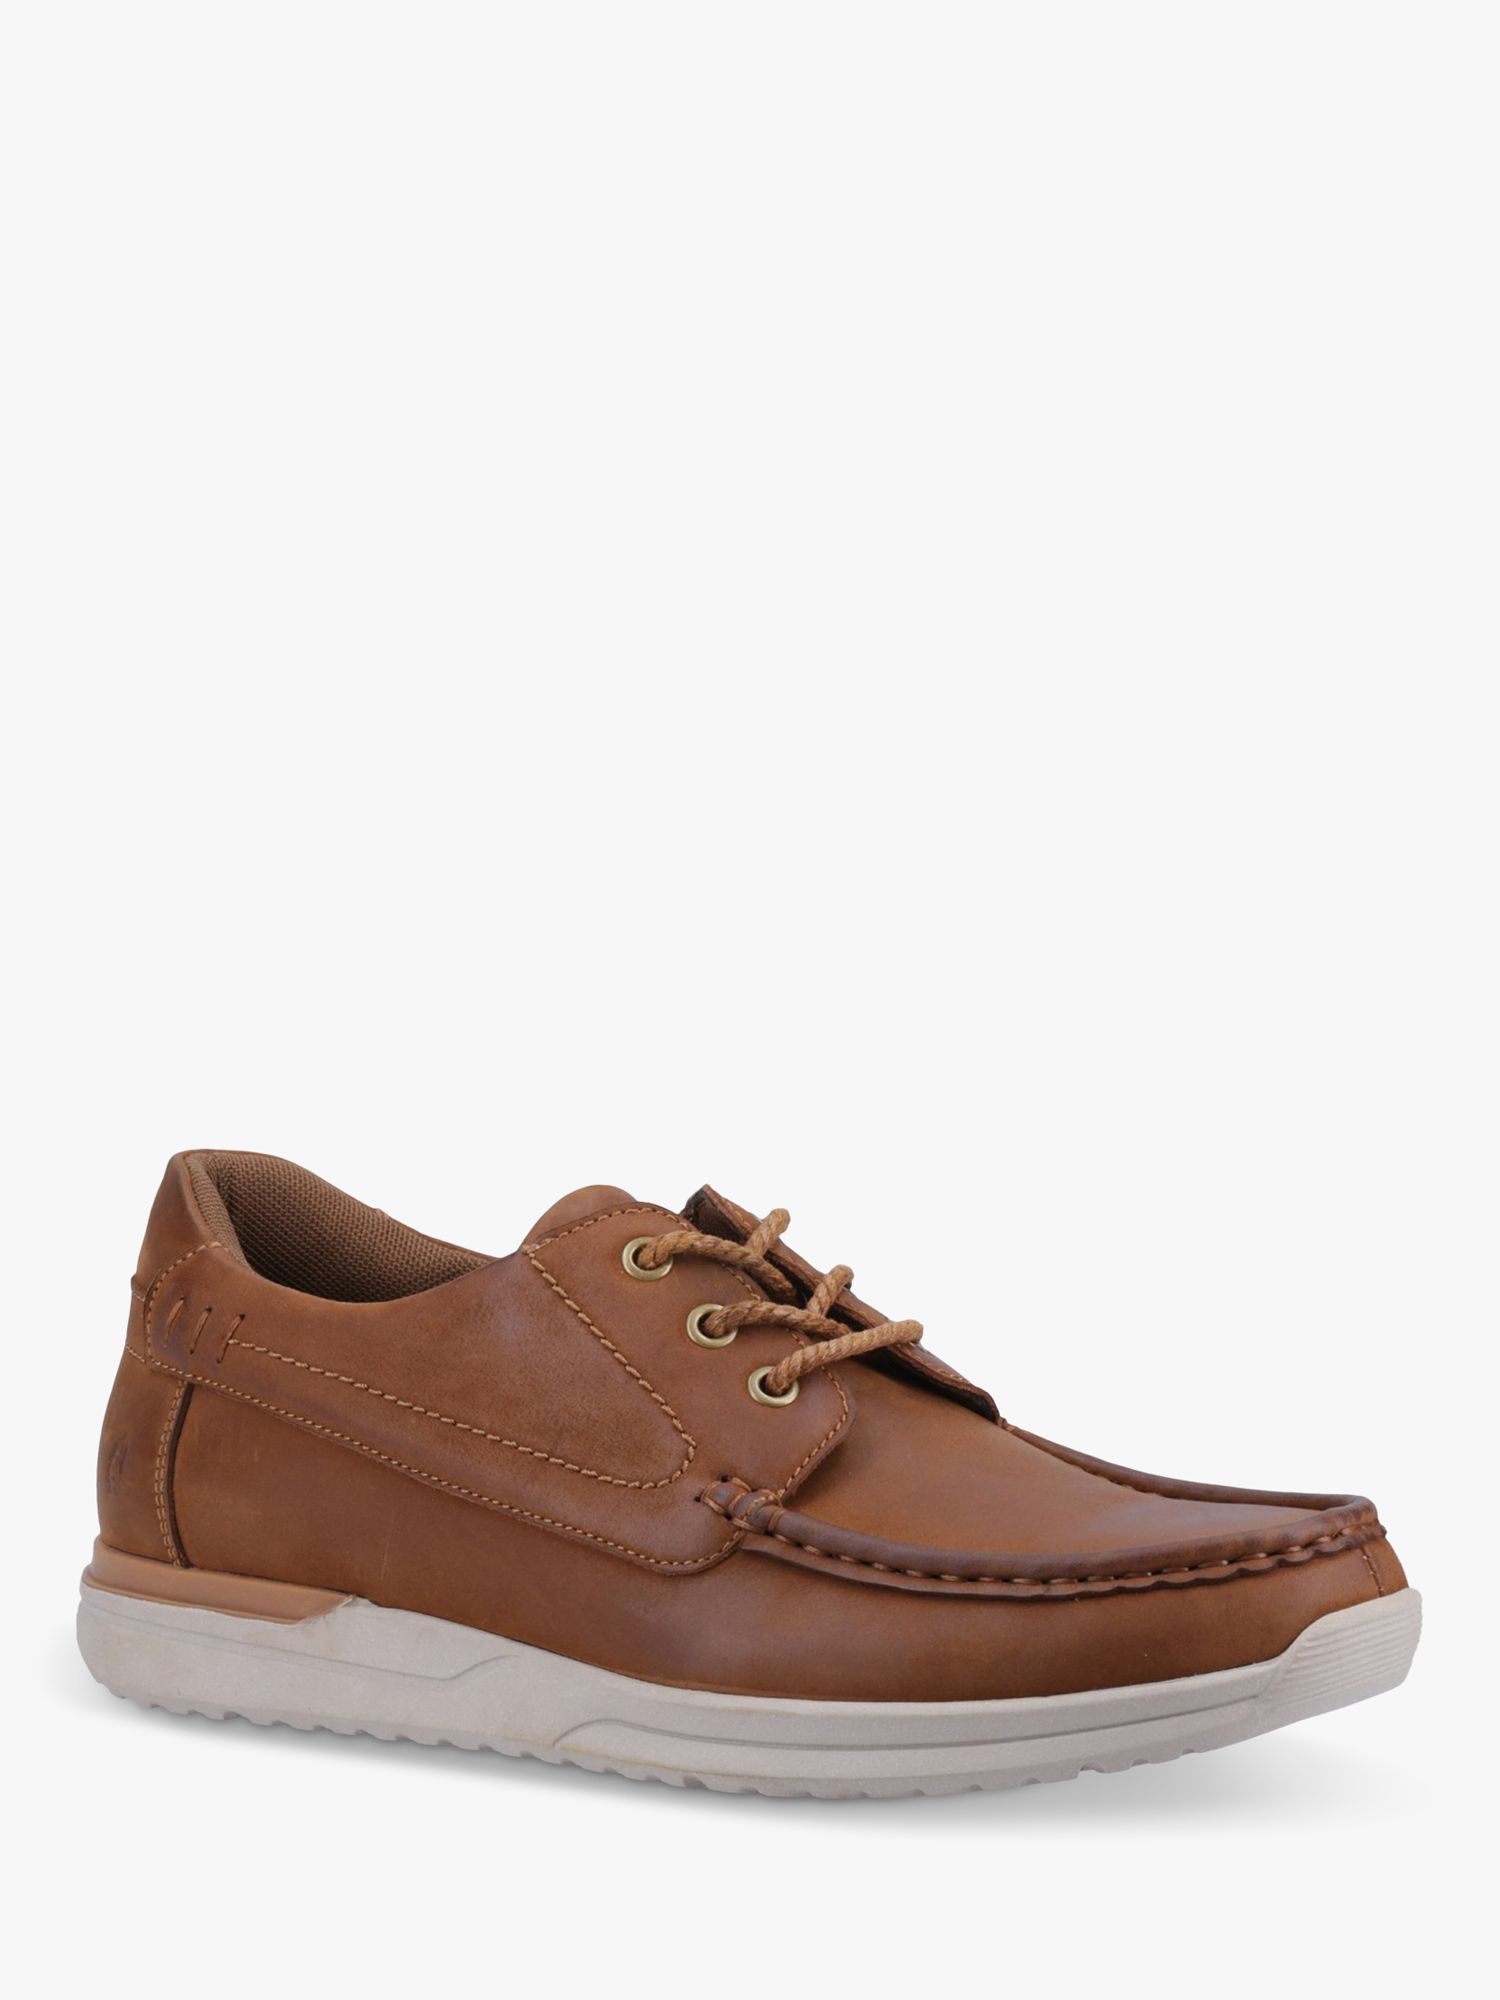 Buy Hush Puppies Howard Leather Lace Up Shoes, Tan Online at johnlewis.com